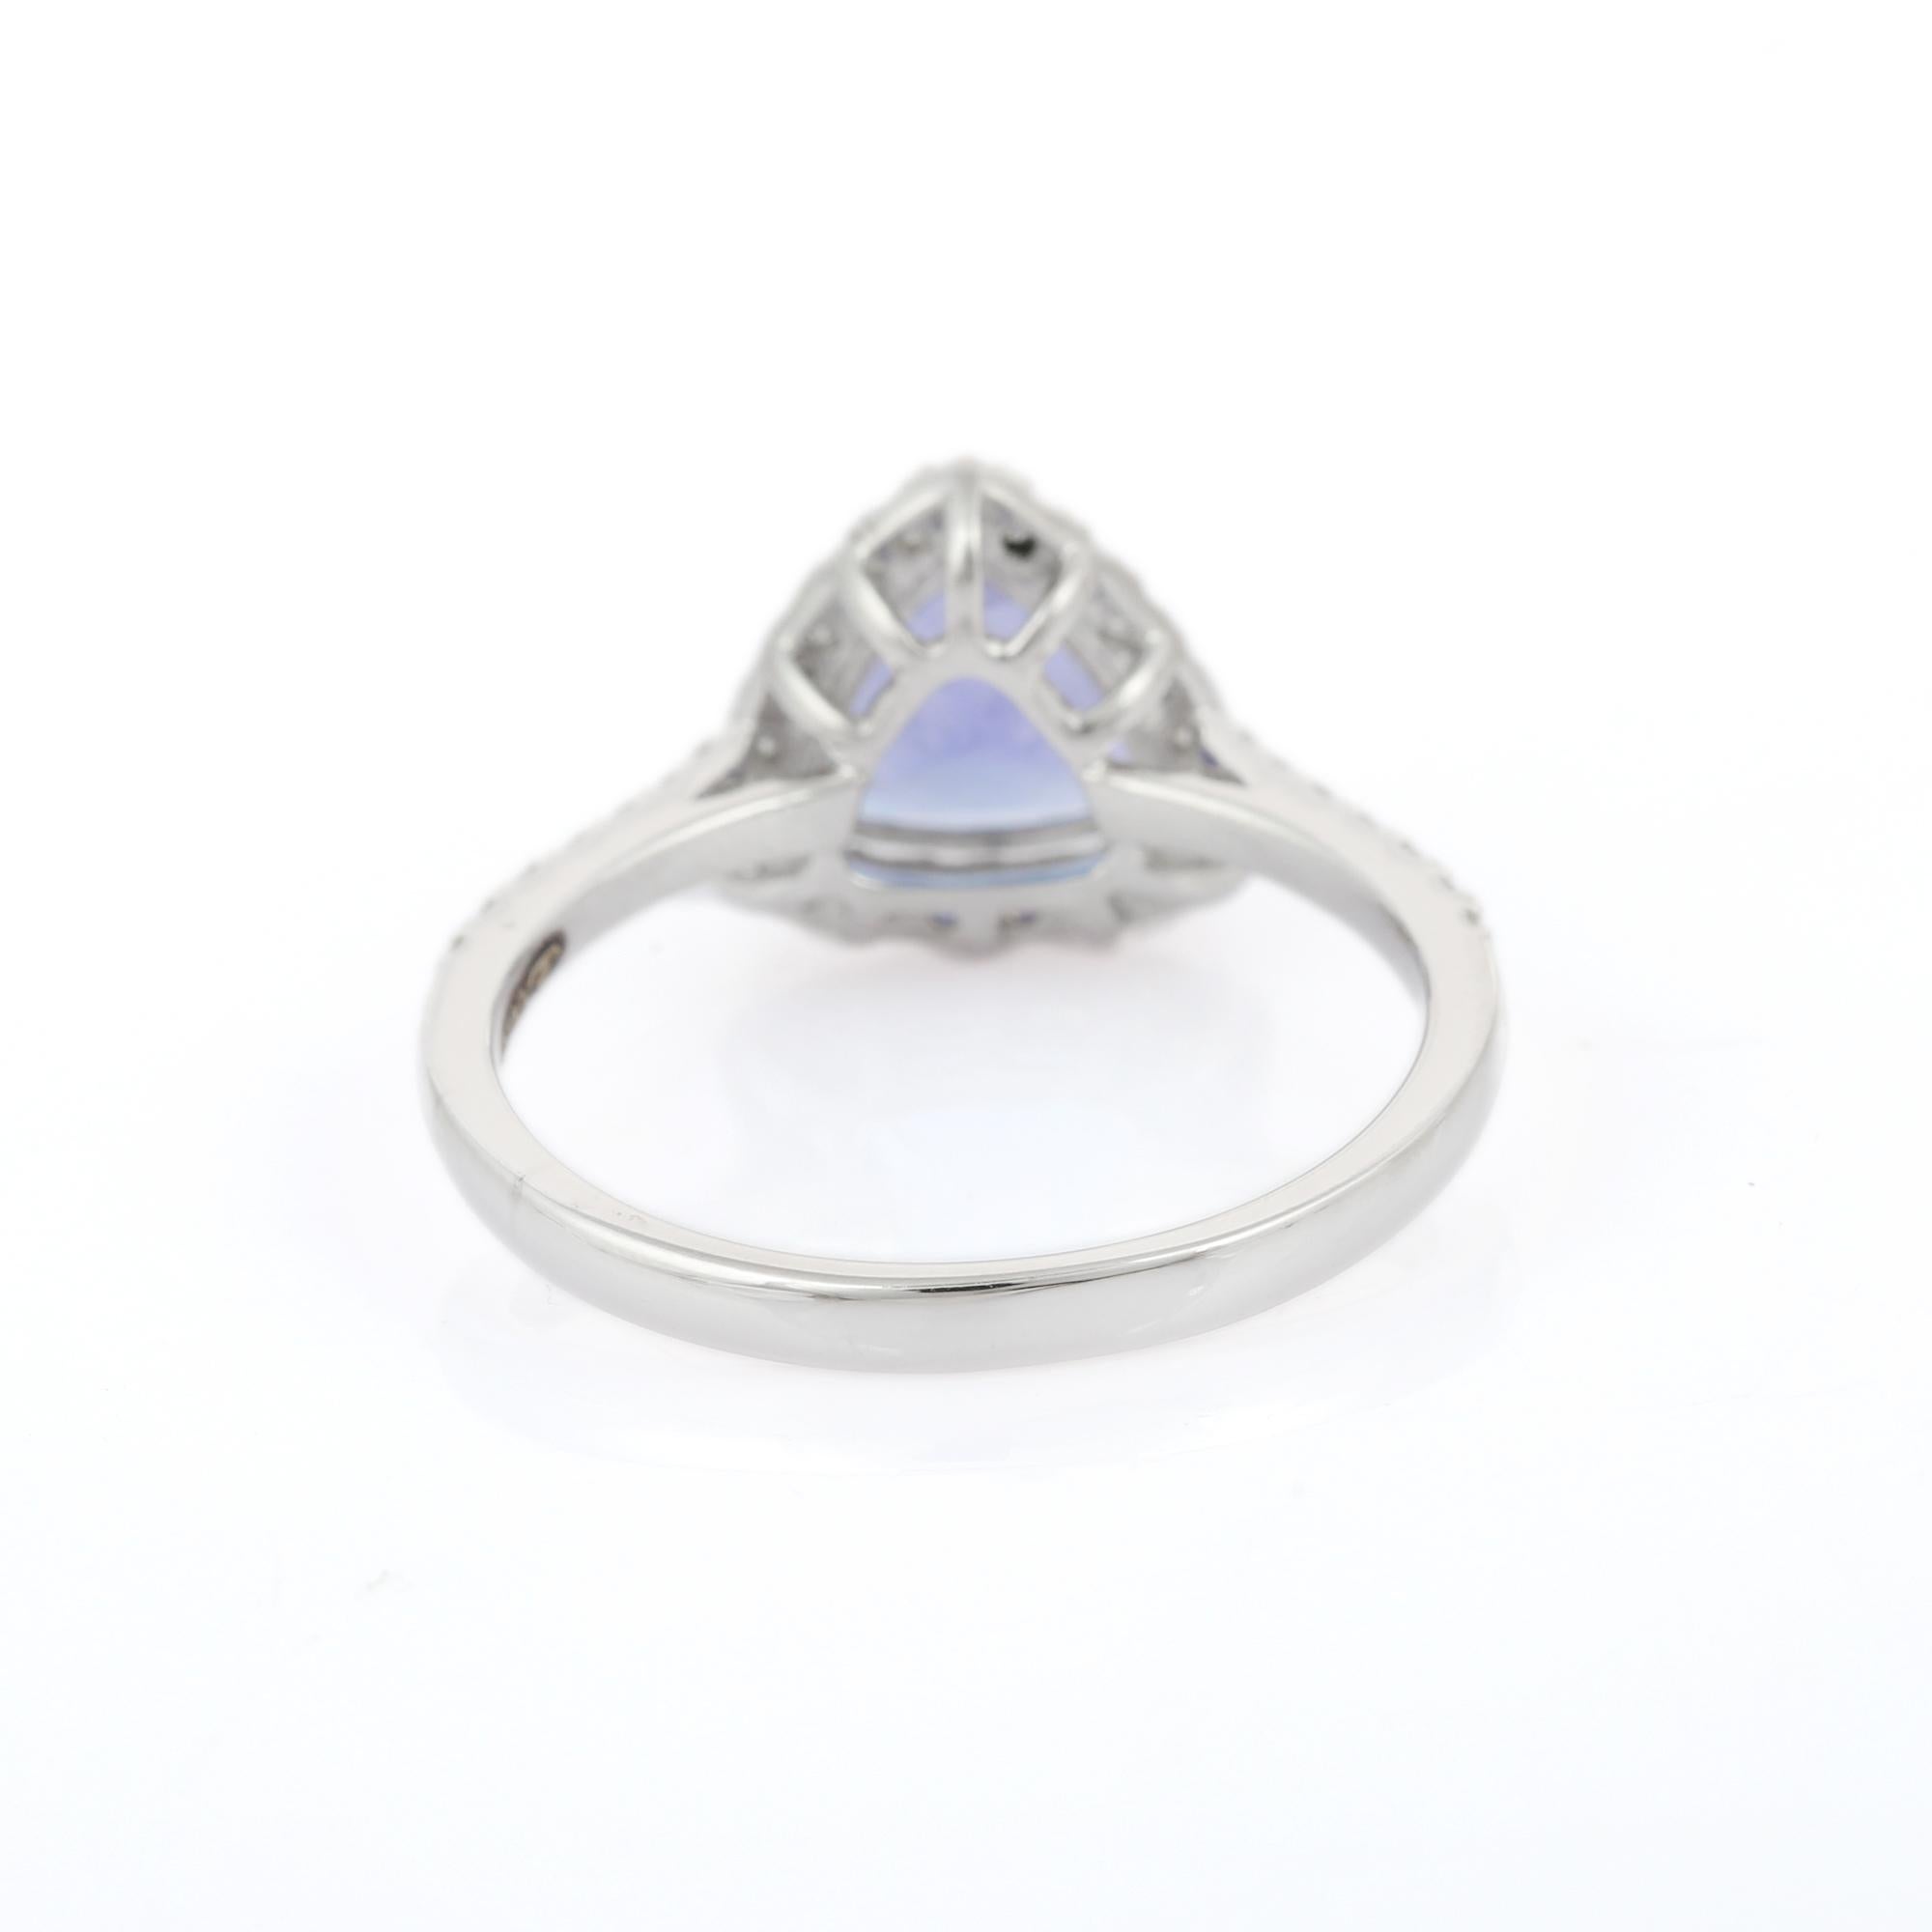 For Sale:  Natural Tanzanite Diamond Engagement Ring in 18k Solid White Gold 3